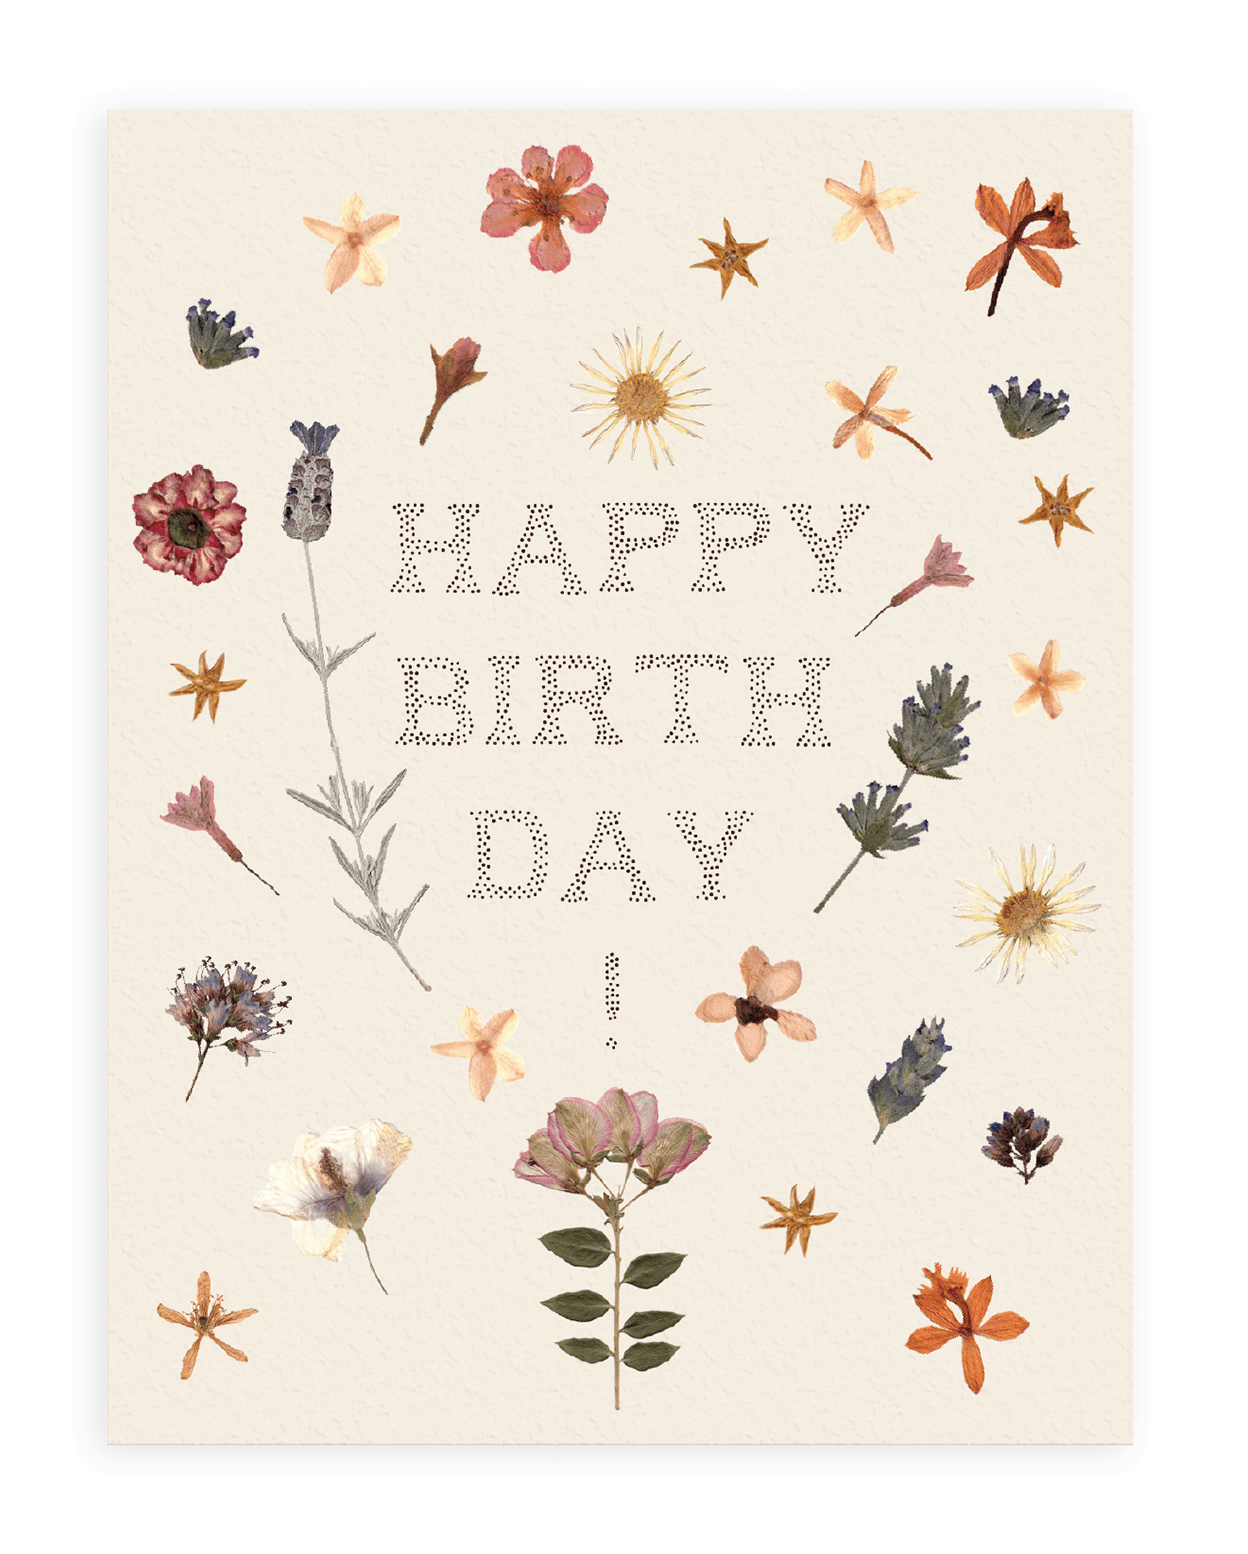 A cream colored card with dried flowers scattered and the words "Happy Birthday!" printed on the cardstock. Shown on white background.